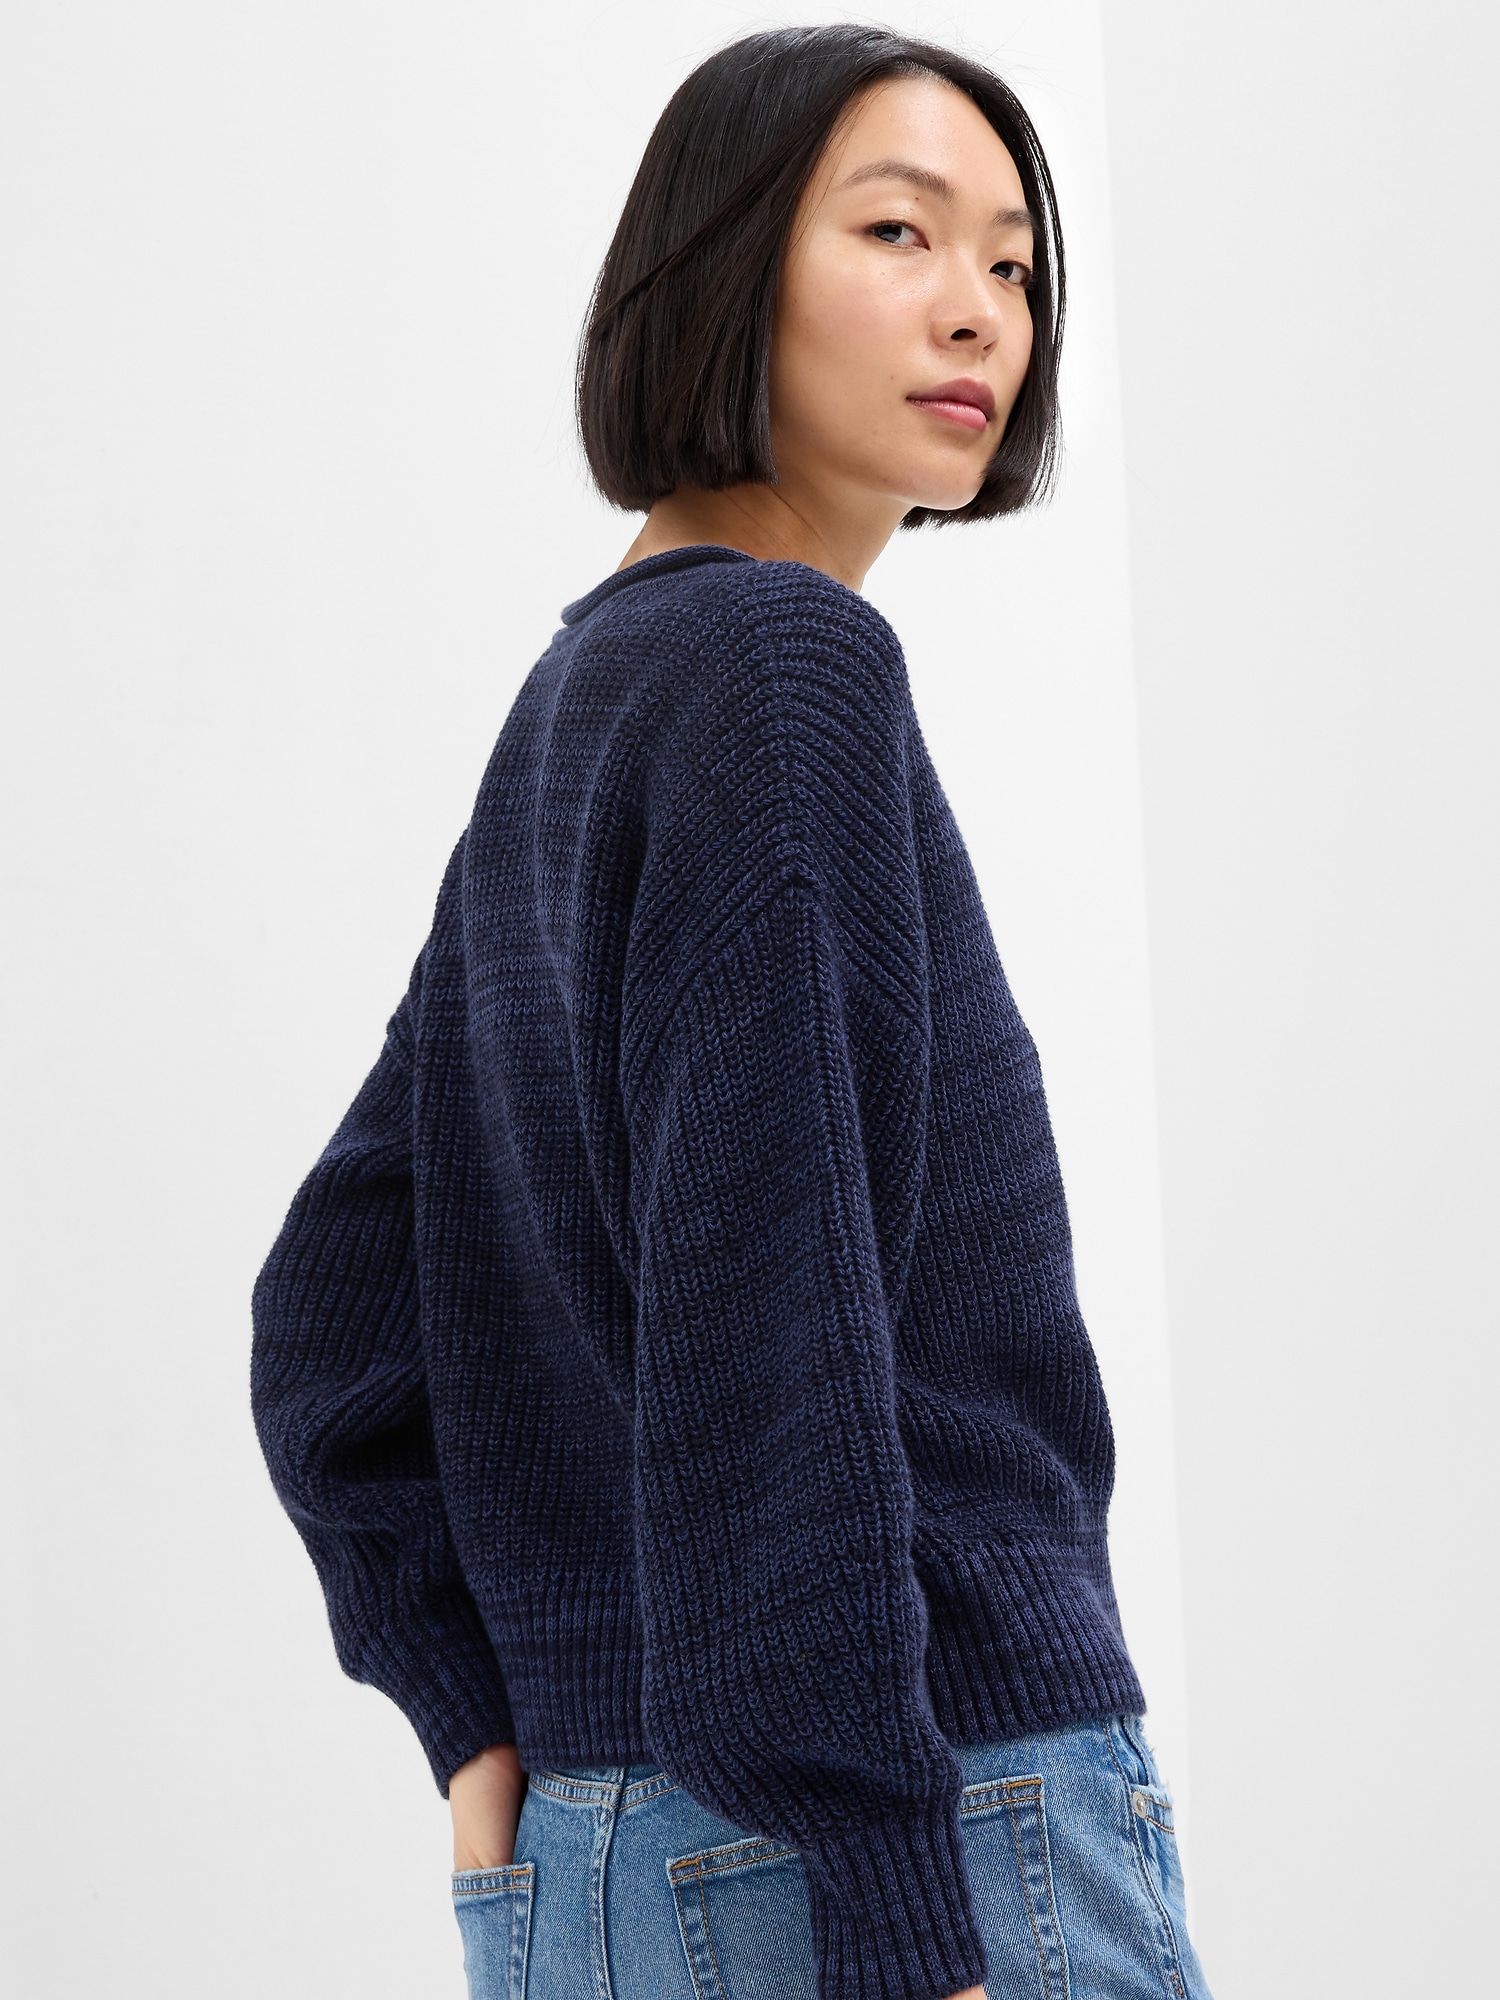 Relaxed Shaker-Stitch Sweater | Gap Factory